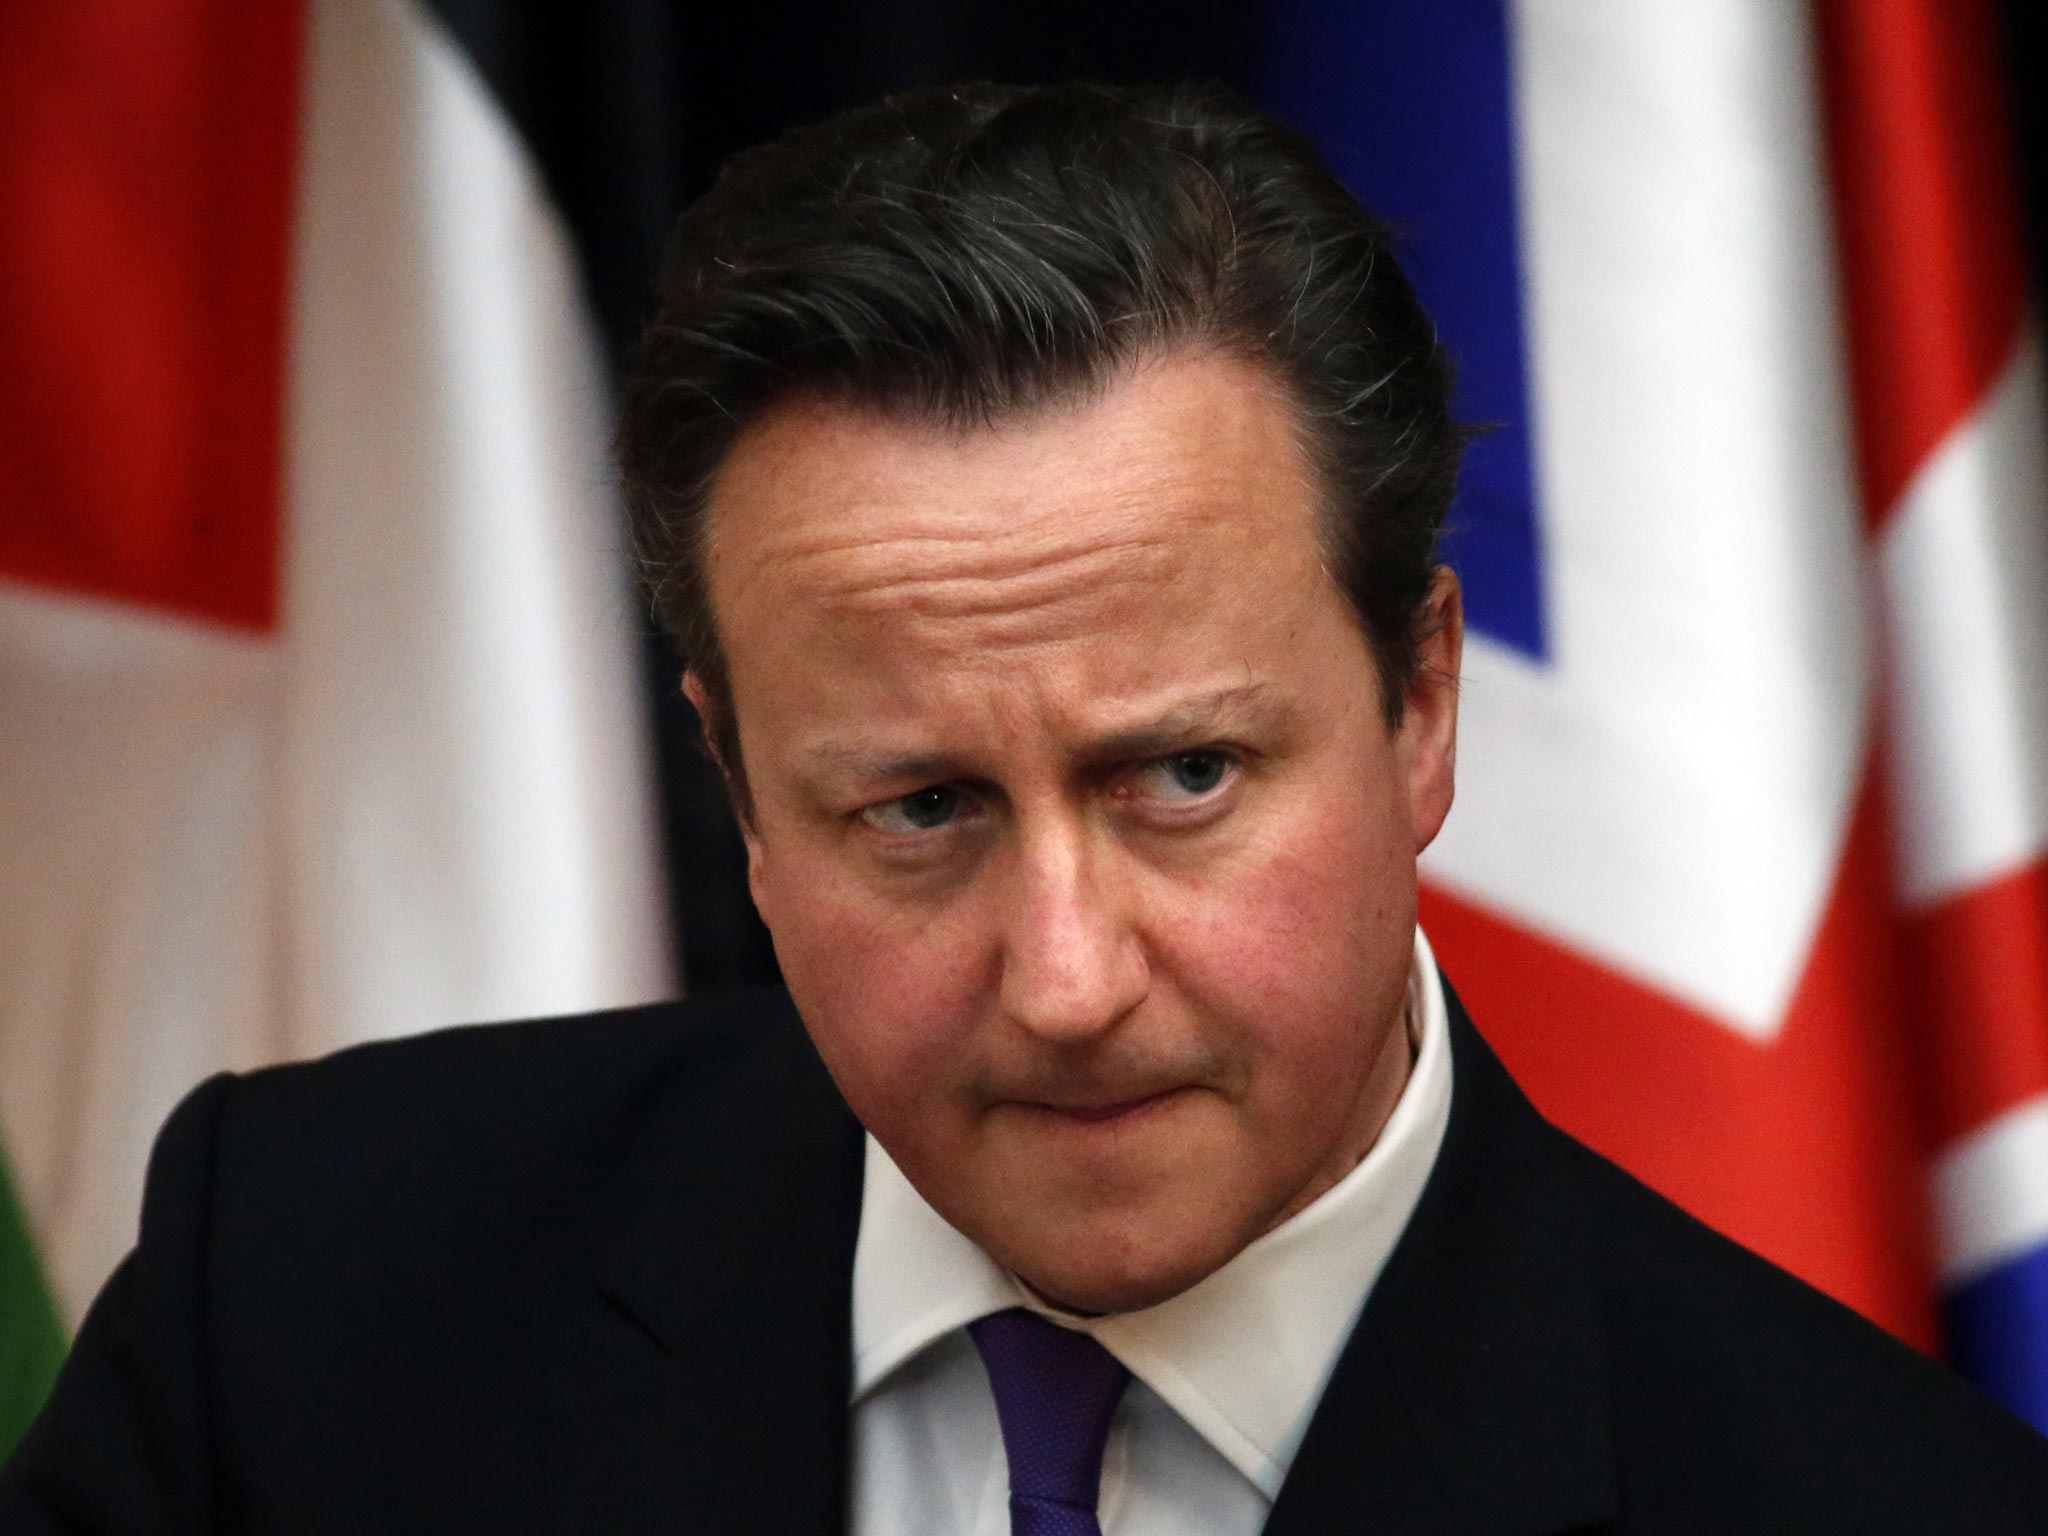 David Cameron was left stumbling over his words when he was quizzed about this year's Eurovision Song Contest